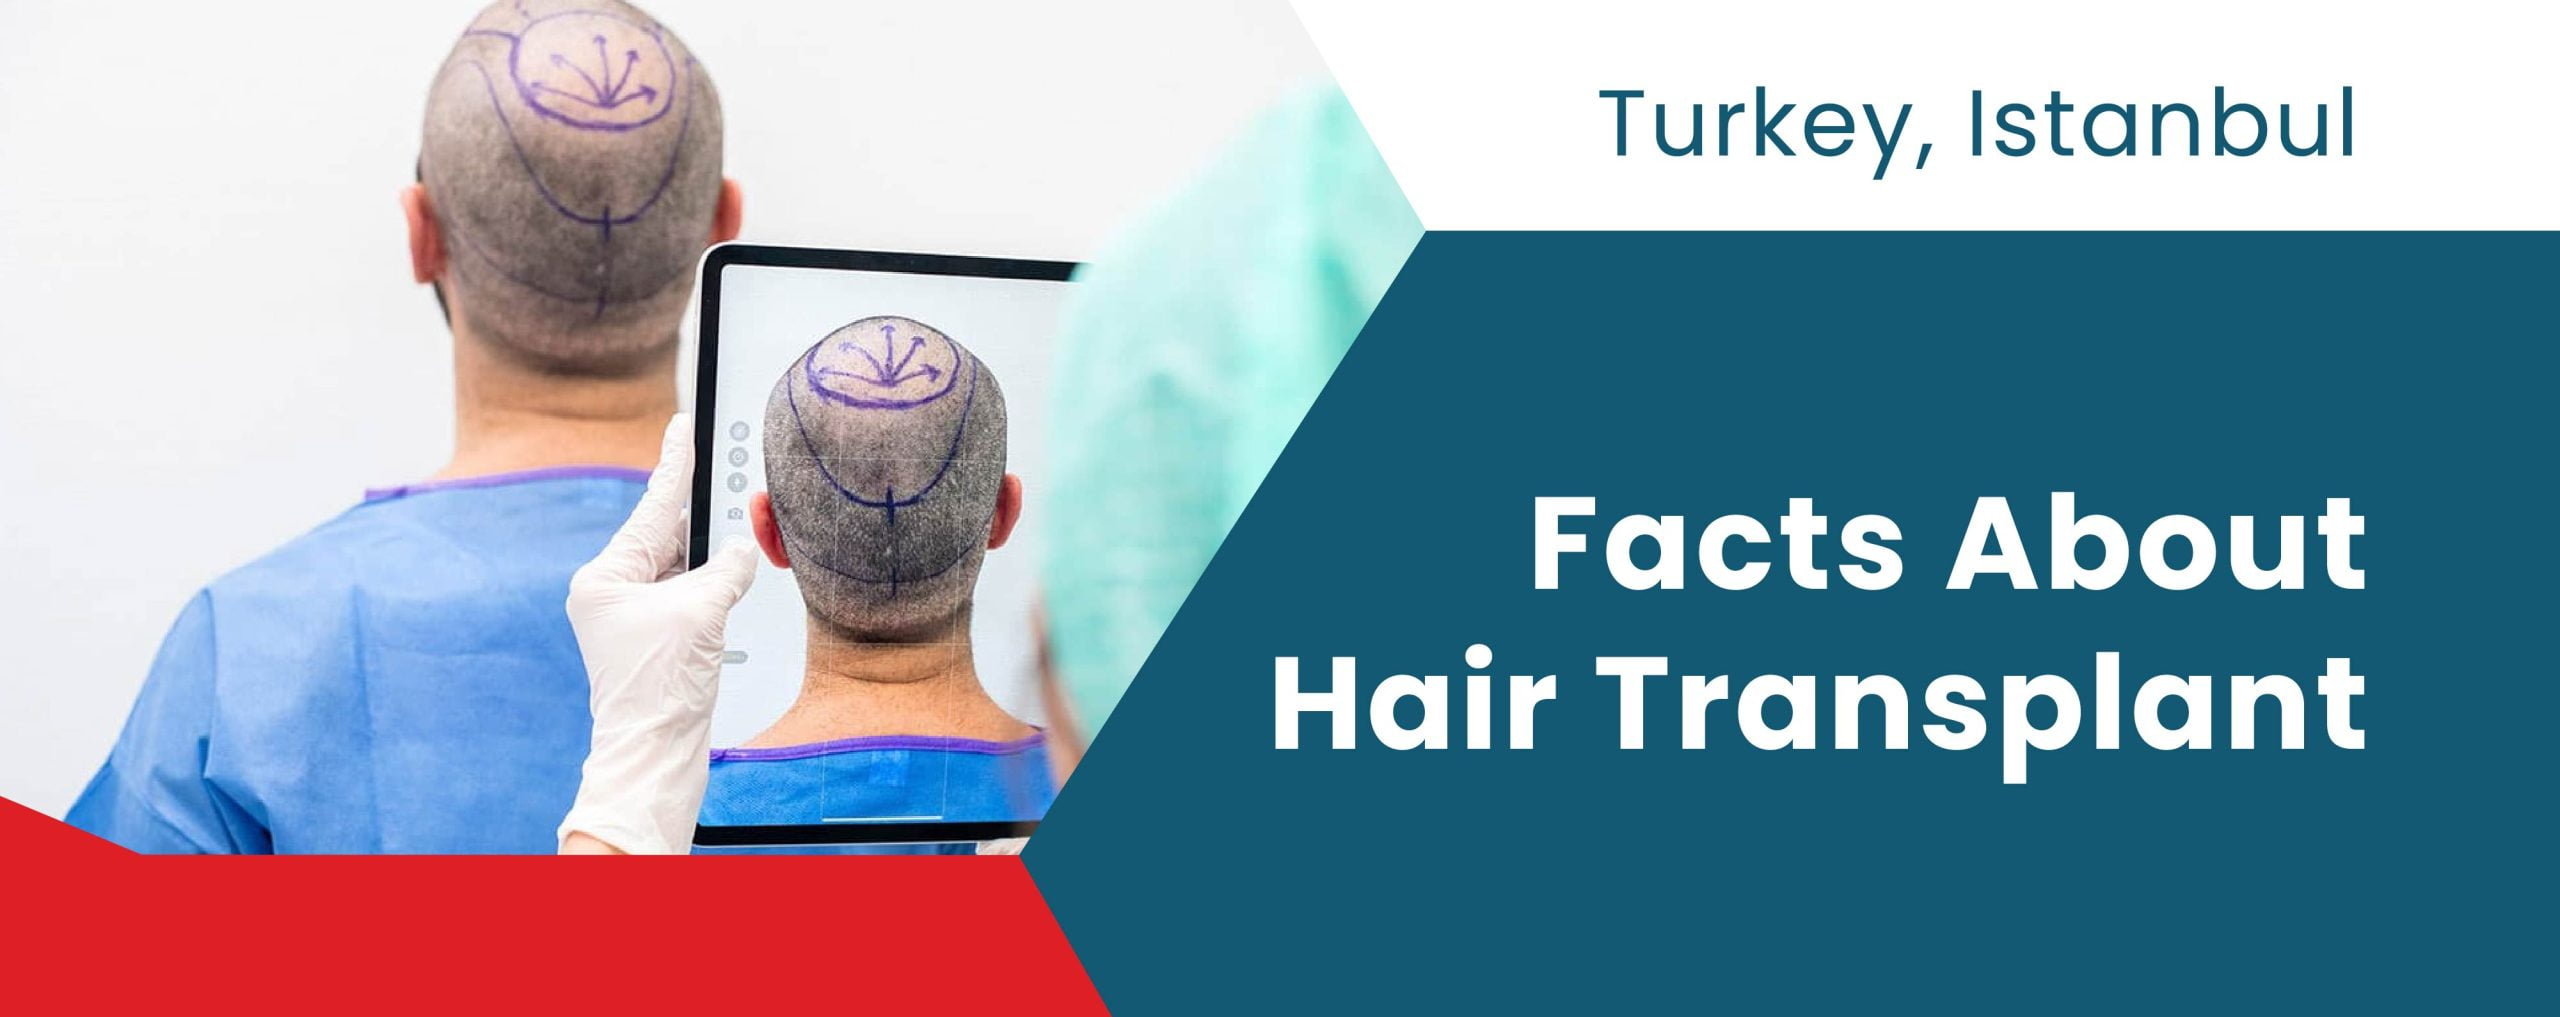 Facts About Hair Transplant in Turkey | ClinMedica